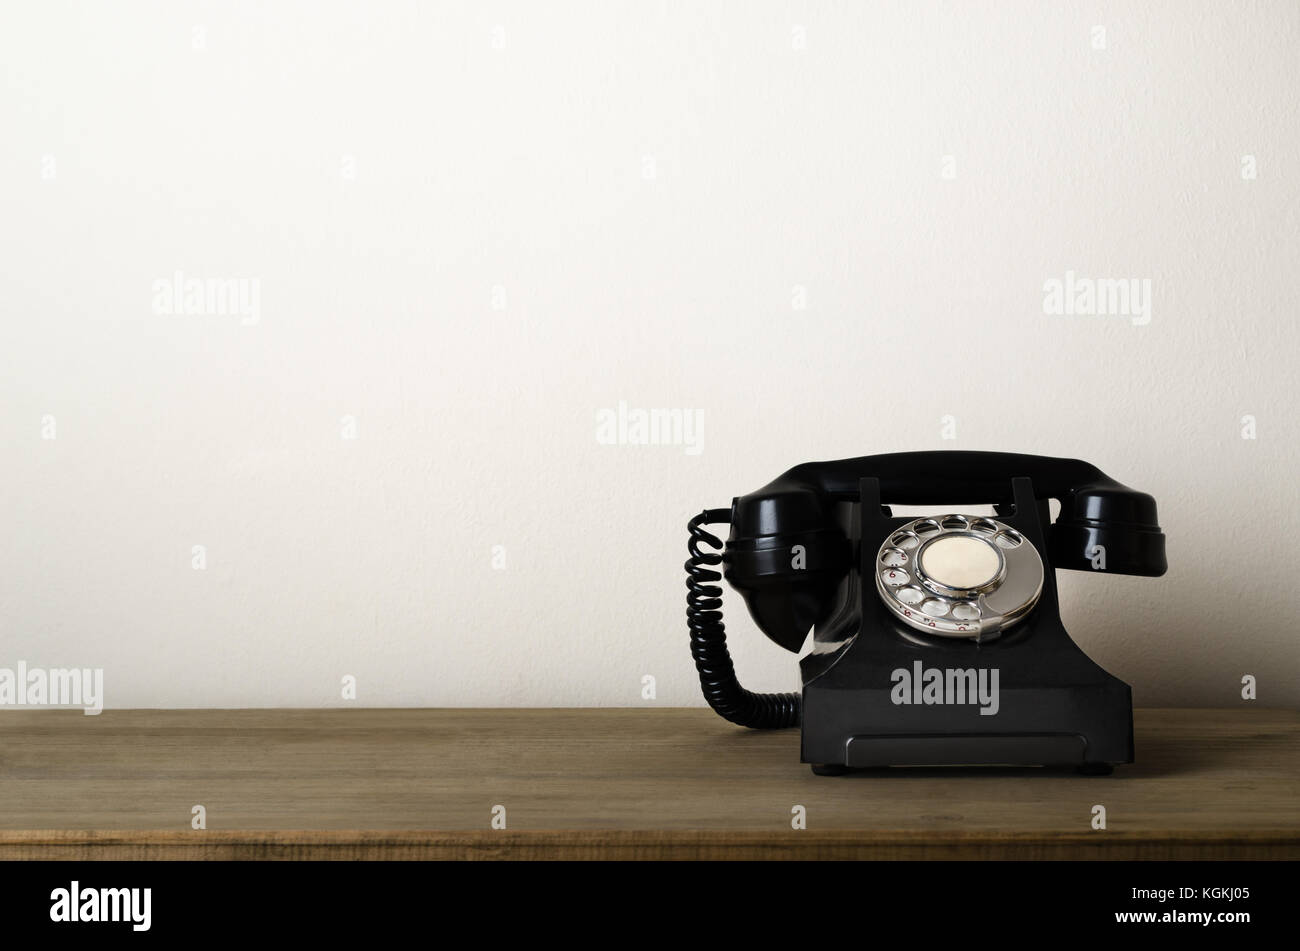 Black, 1940s vintage bakelite telephone at eye level on a wooden desk with ivory white wall as background providing copy space to the left. Stock Photo